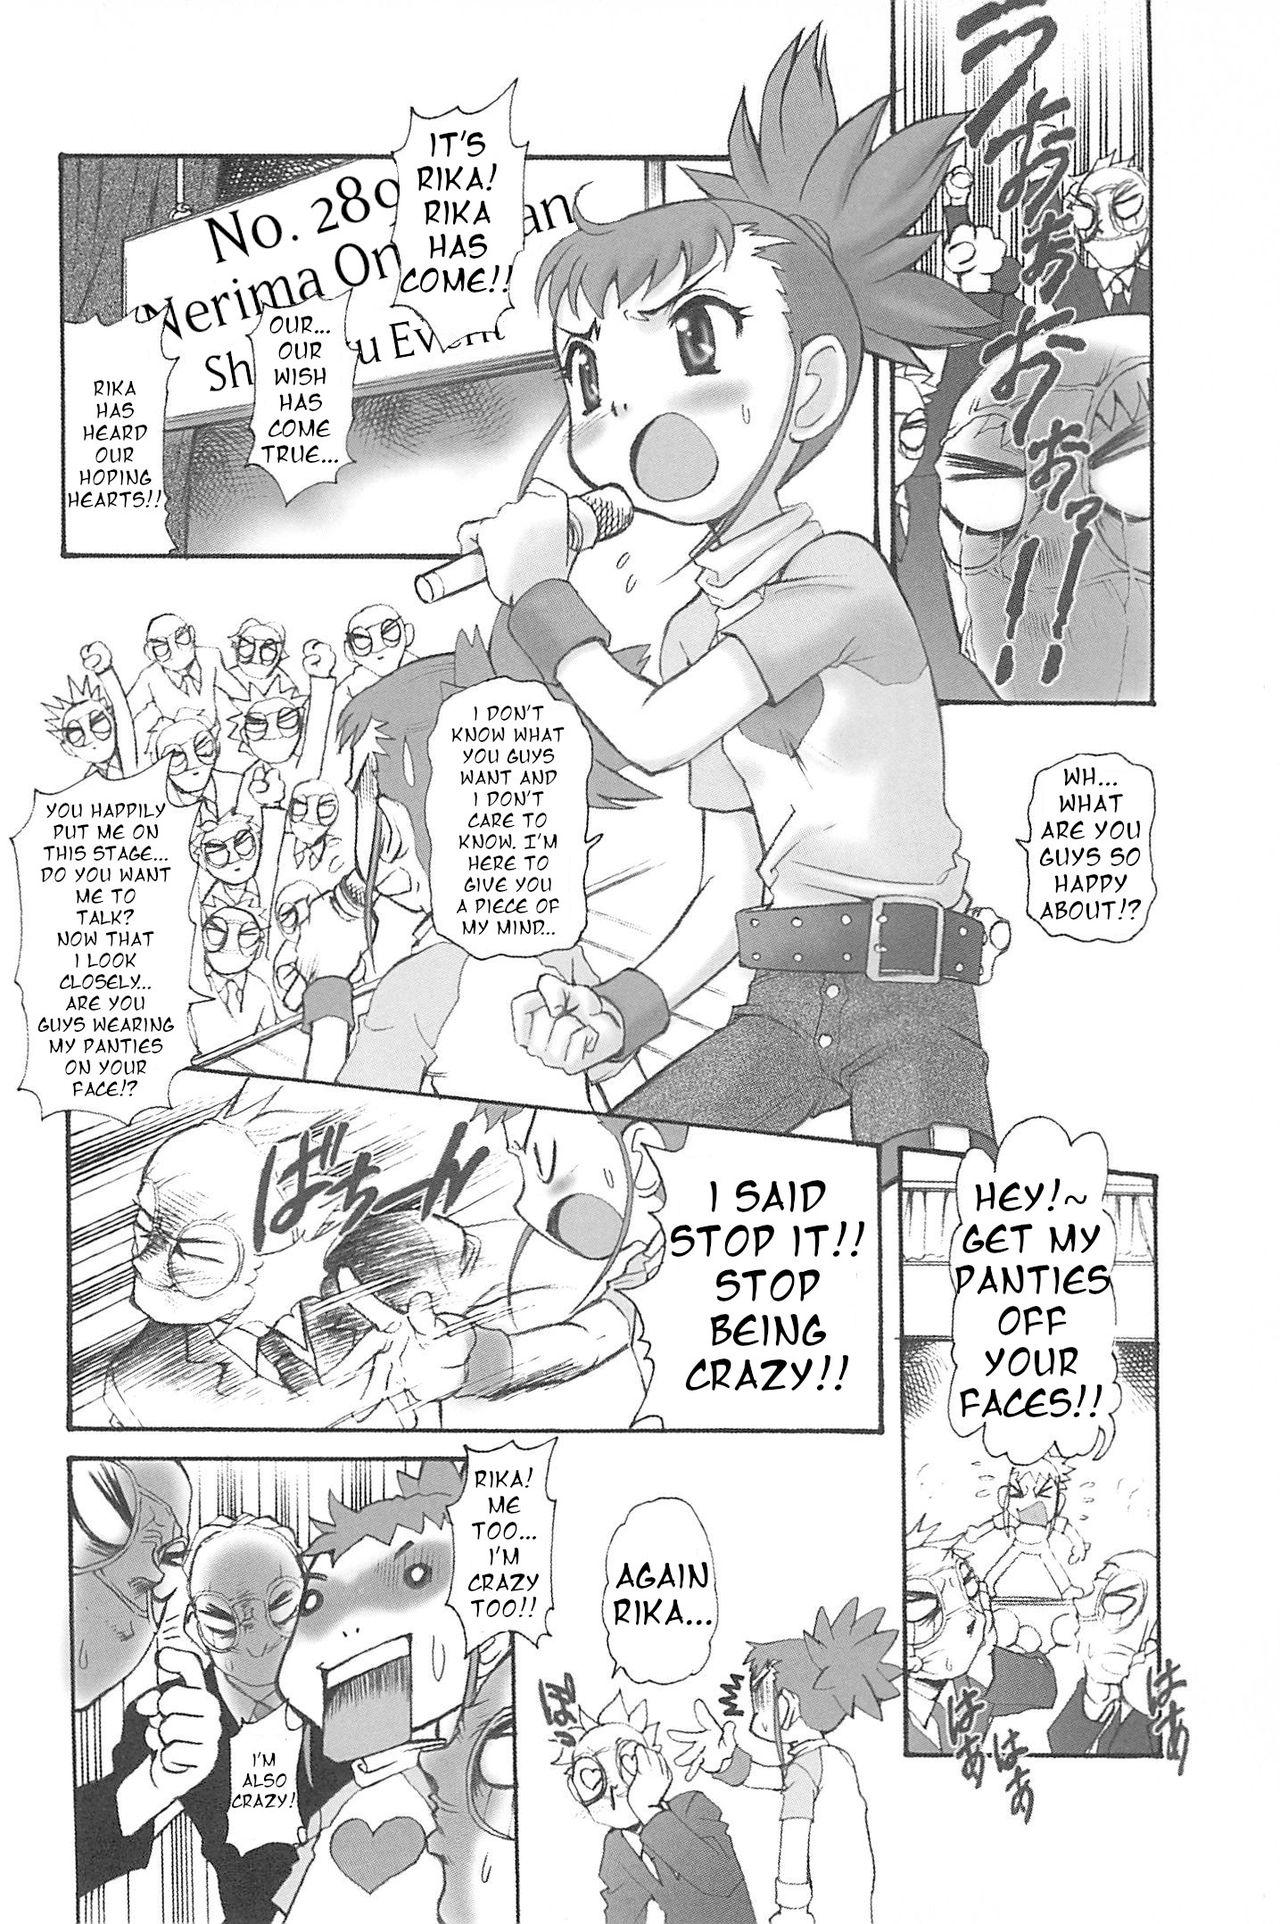 Public Sex Cranial Business Trip! Nerima's Onii-chan!! - Digimon Digimon tamers Camgirls - Page 2